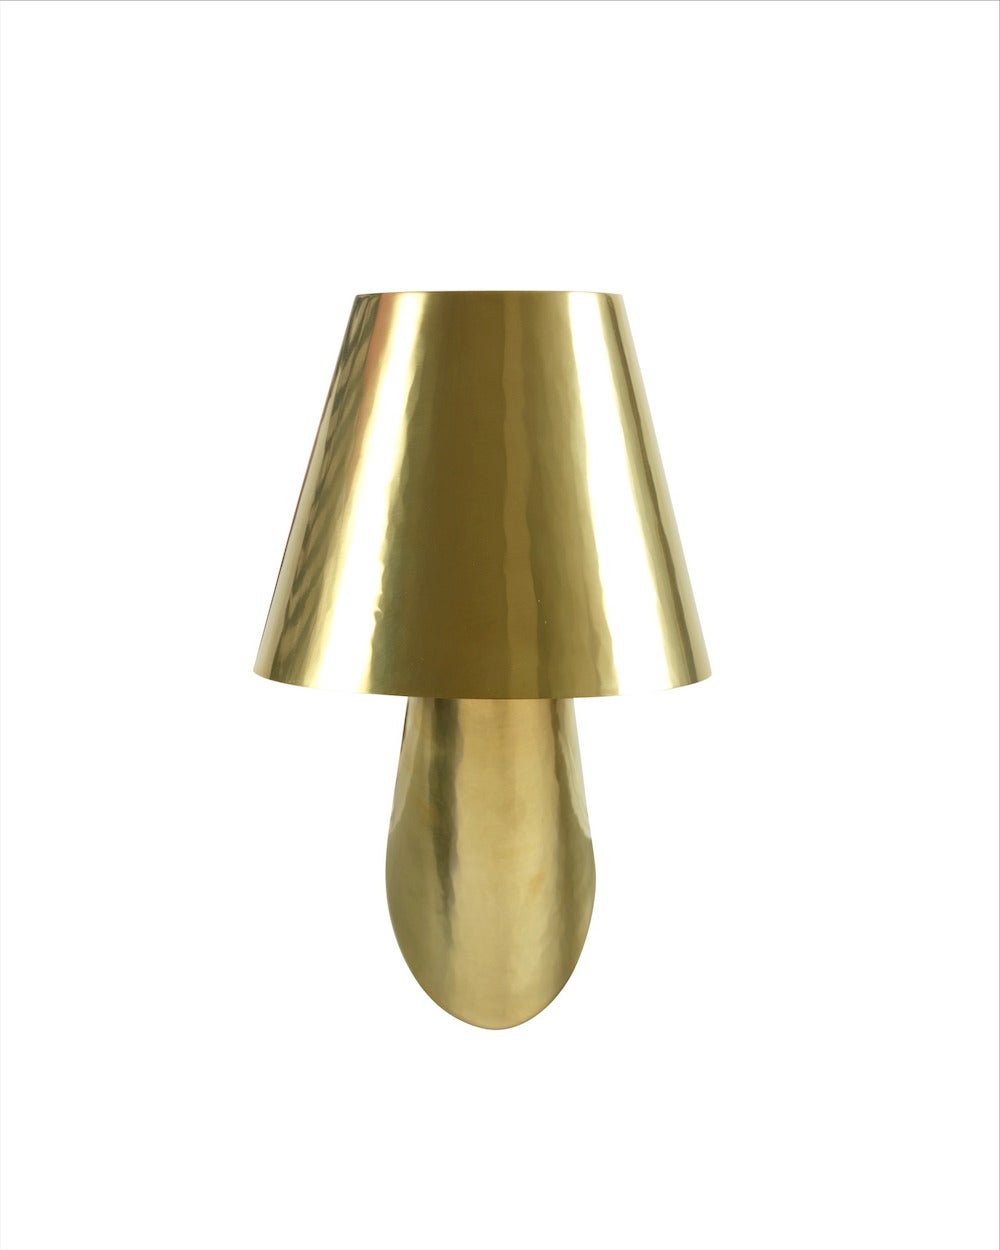 An unique pair of wall lamps of hammered and polished brass.